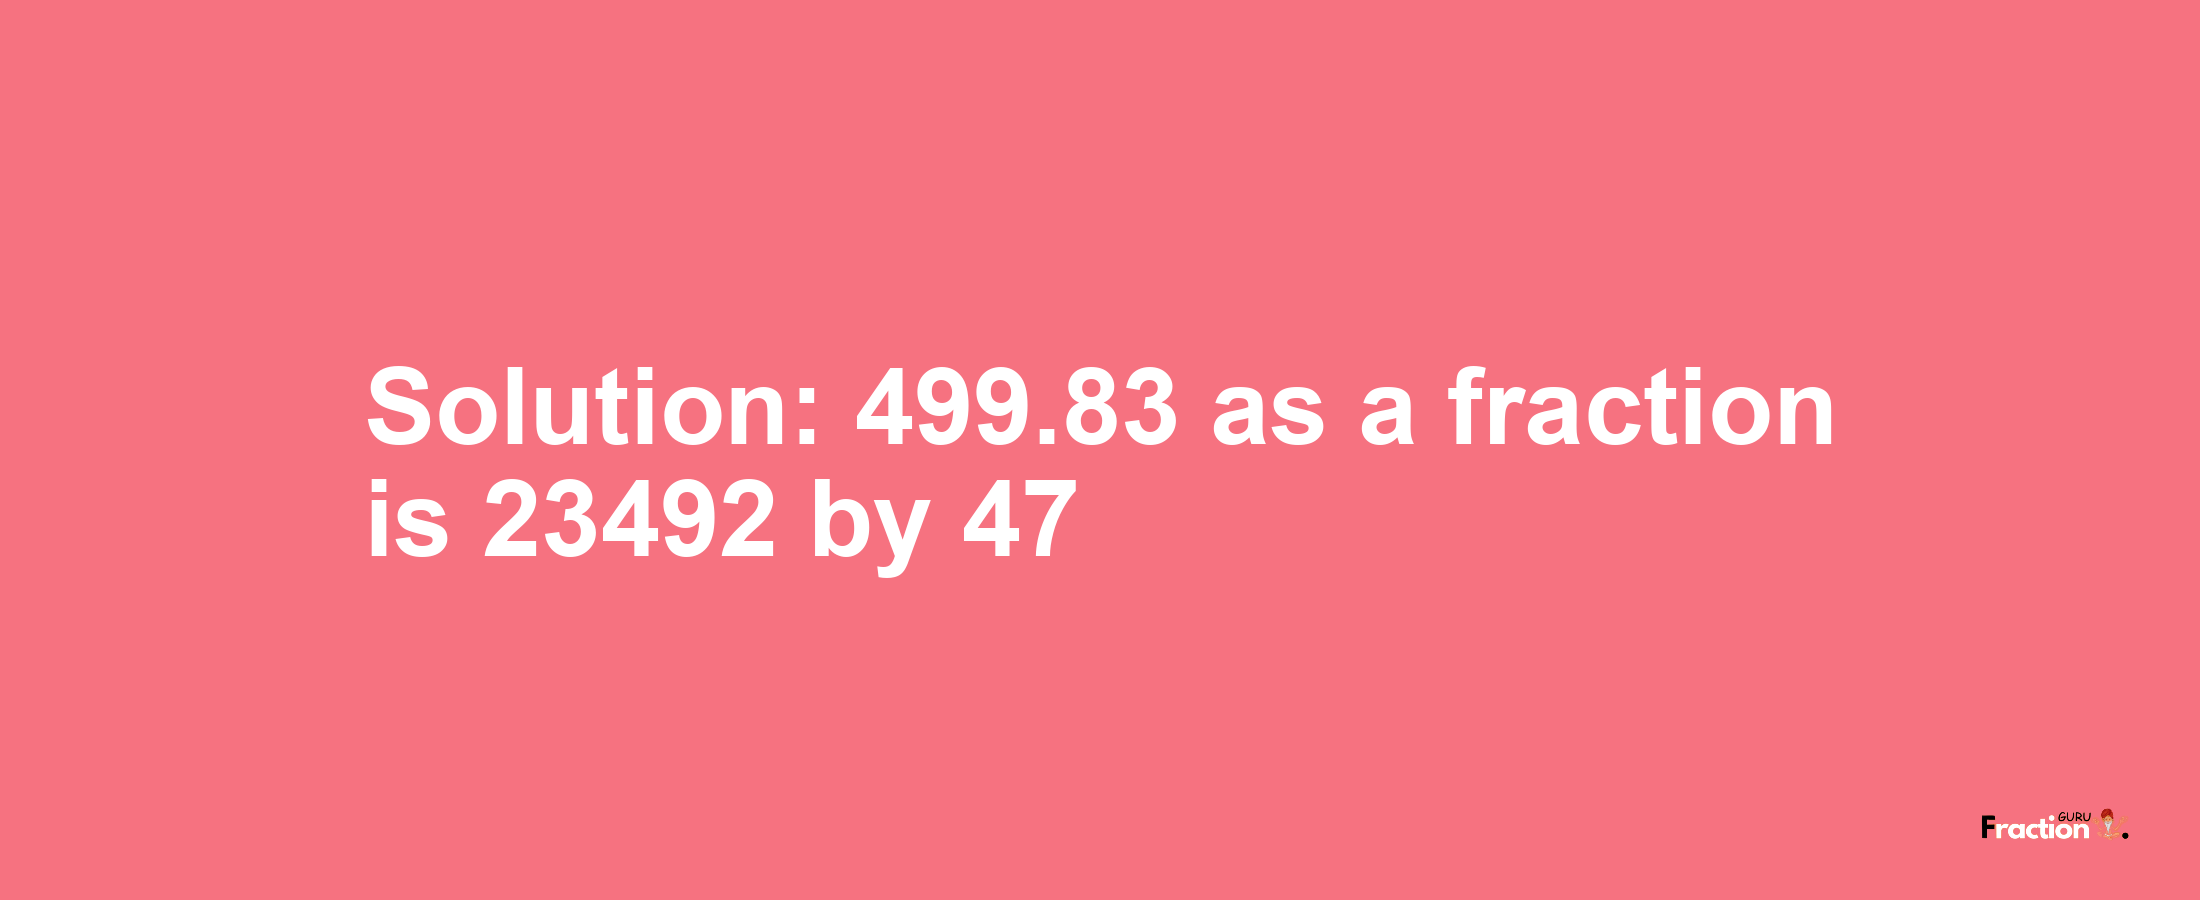 Solution:499.83 as a fraction is 23492/47